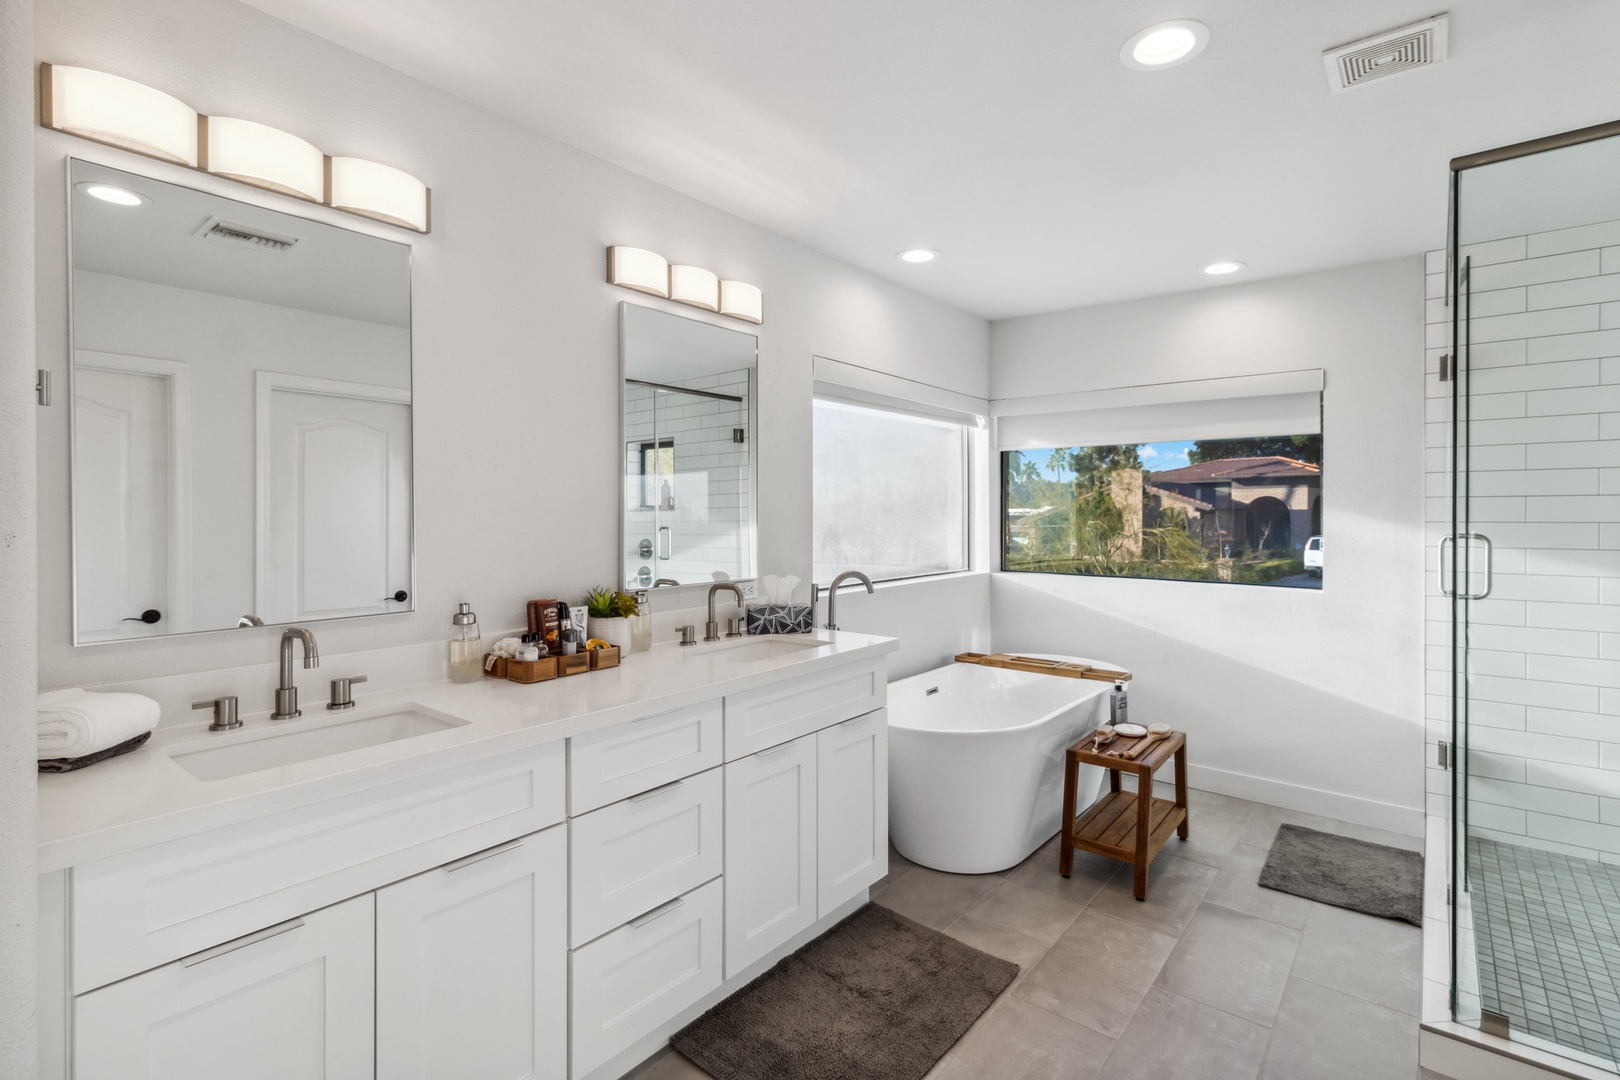 Phoenix Vacation Rentals, Majestic Mountain Views at Piestewa Peak Paradise - The ensuite bathroom features a double vanity sink, a generously sized shower with a rainfall shower head, a freestanding soaker tub, and a spacious walk-in closet.